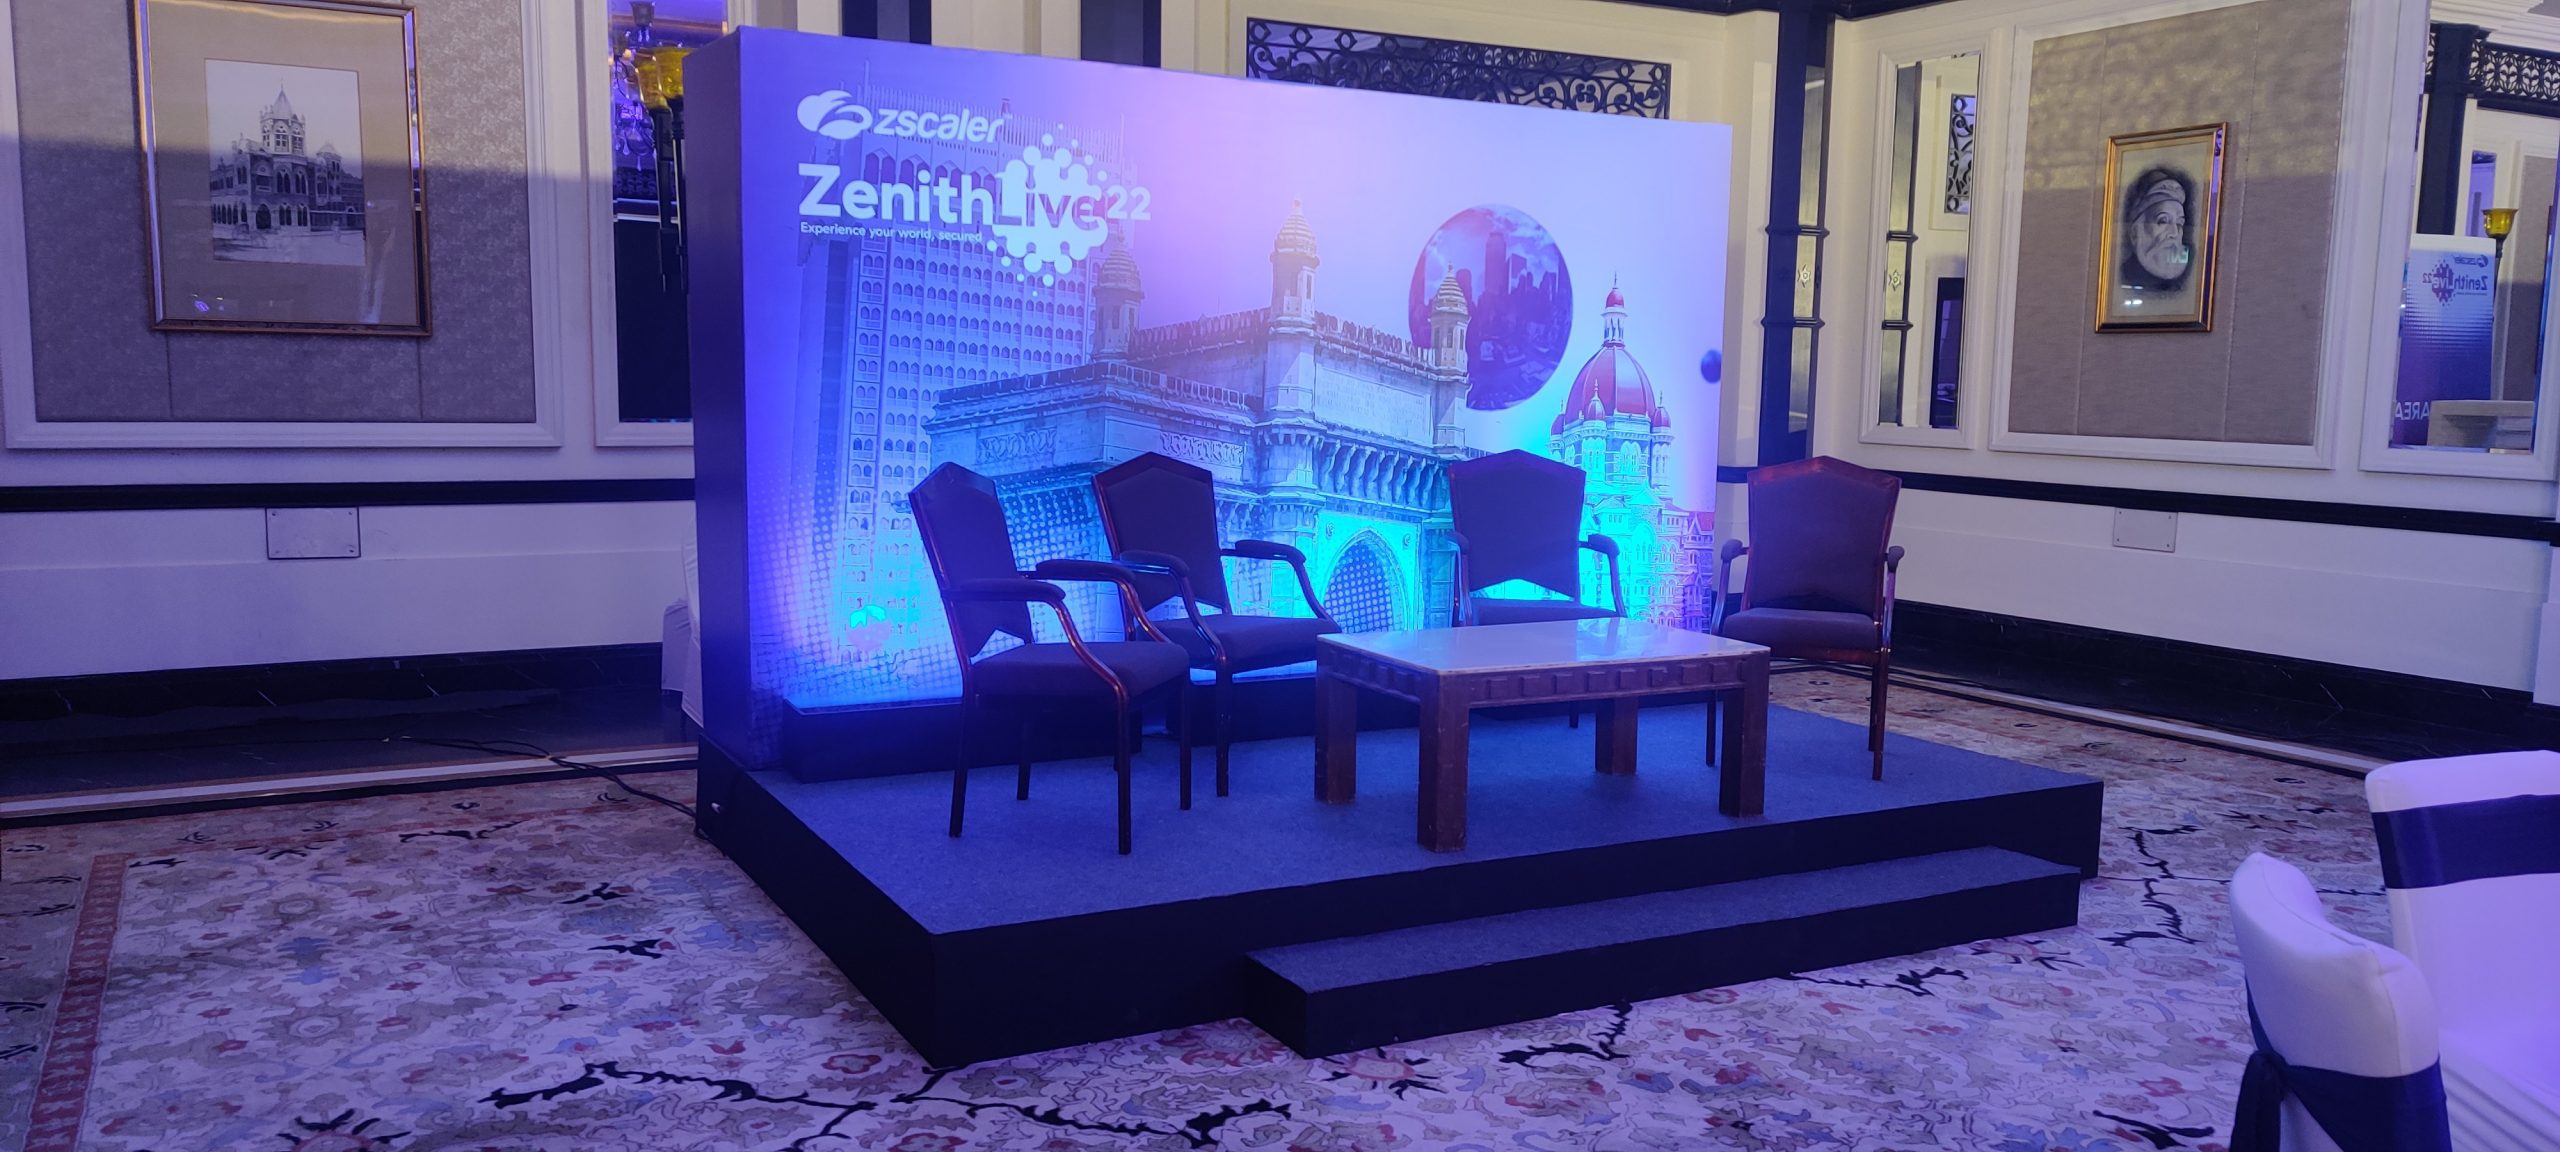 Zscaler - Zenith Live Tour India